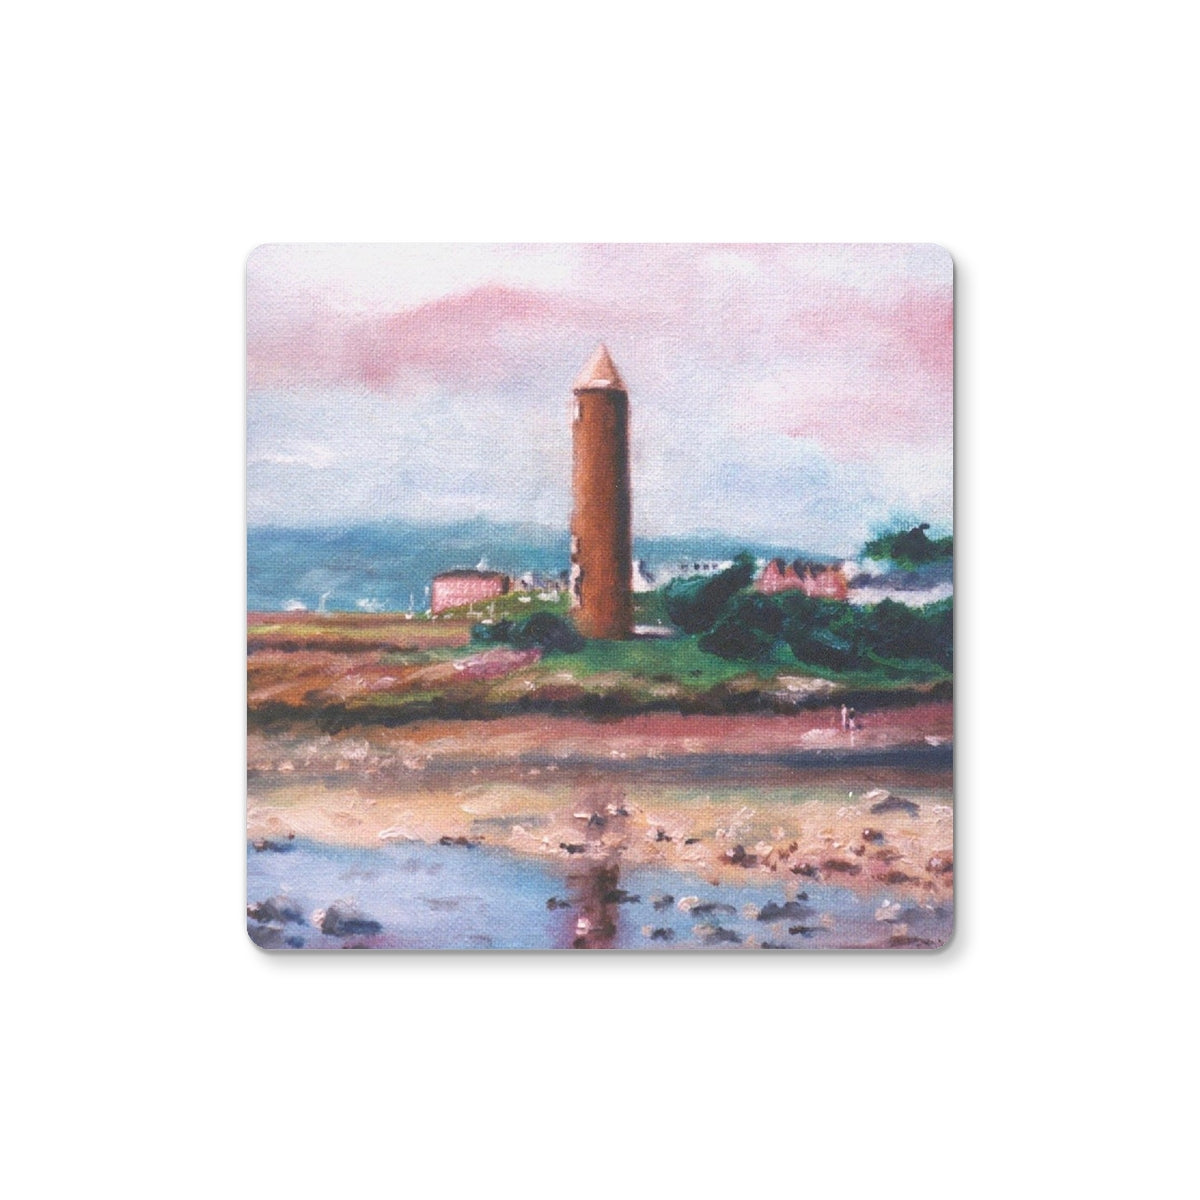 Pencil Point Largs Art Gifts Coaster-Coasters-River Clyde Art Gallery-Single Coaster-Paintings, Prints, Homeware, Art Gifts From Scotland By Scottish Artist Kevin Hunter